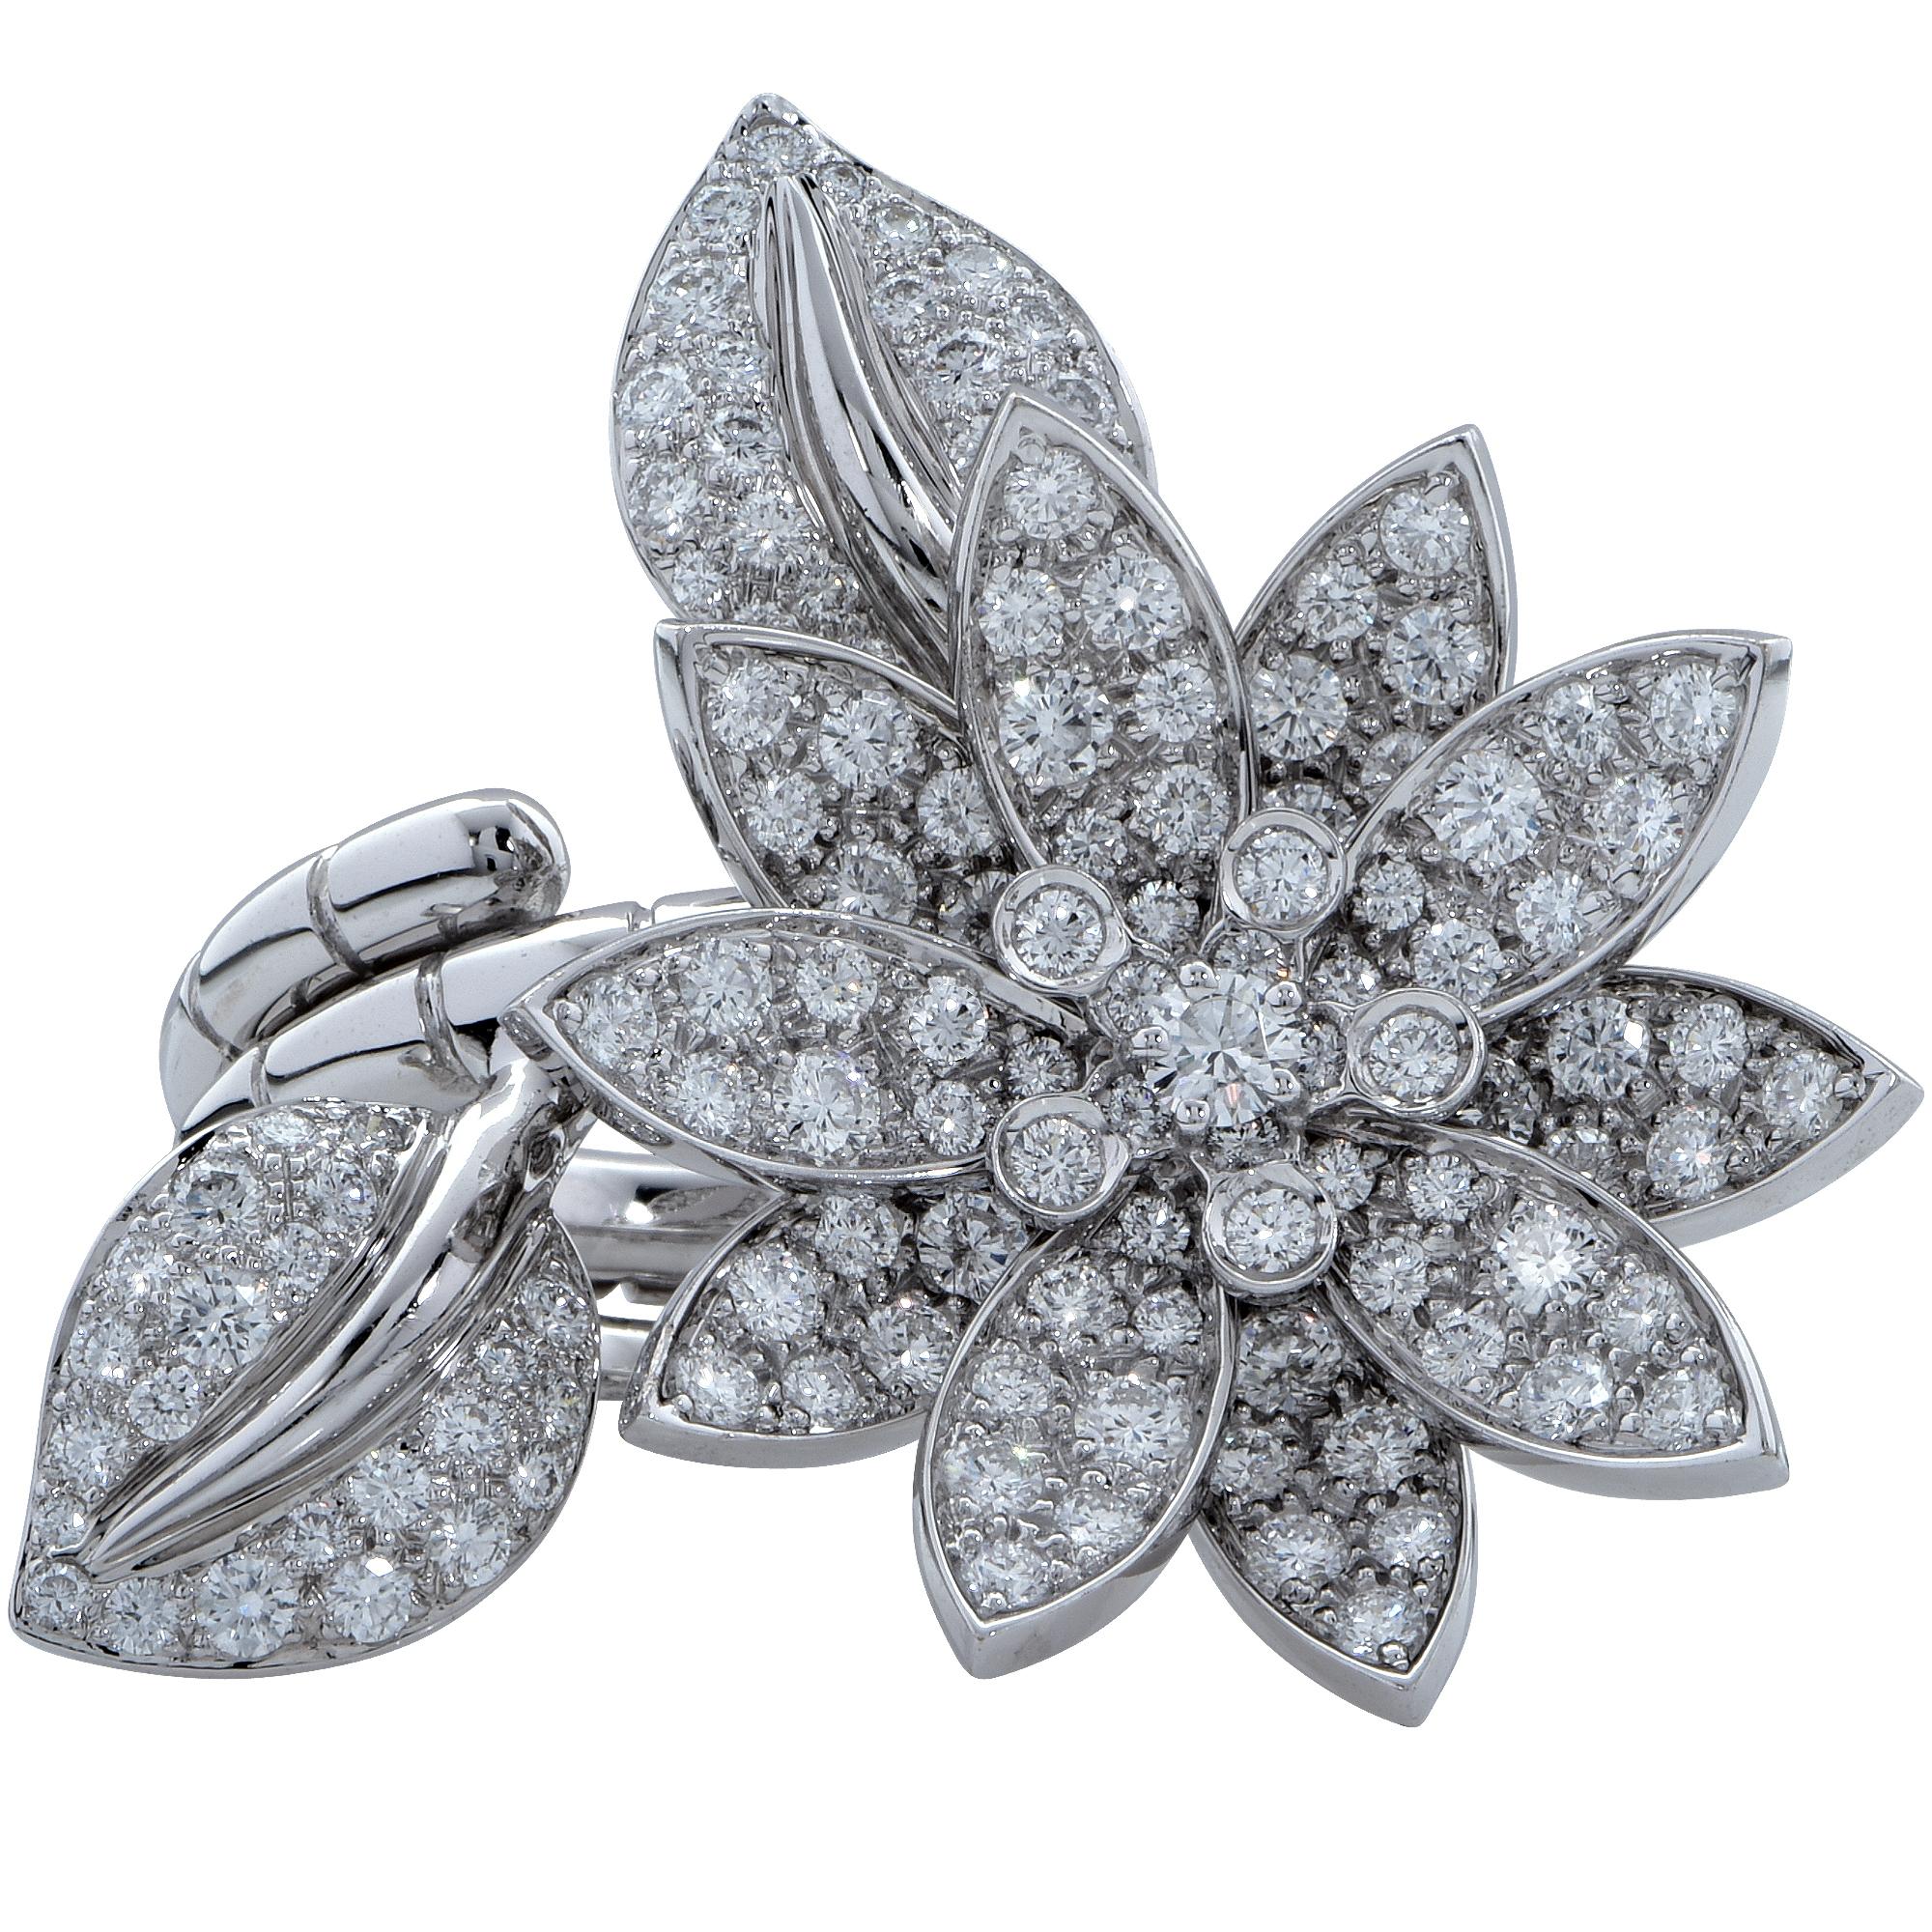 Van Cleef & Arpels Lotus Between the fingers ring, handcrafted 18K white gold, containing 127 round brilliant cut diamonds weighing 2.13cts D- F color, IF-VVS2 clarity. This spectacular ring is a European size 5.5. A truly dazzling and harmonious